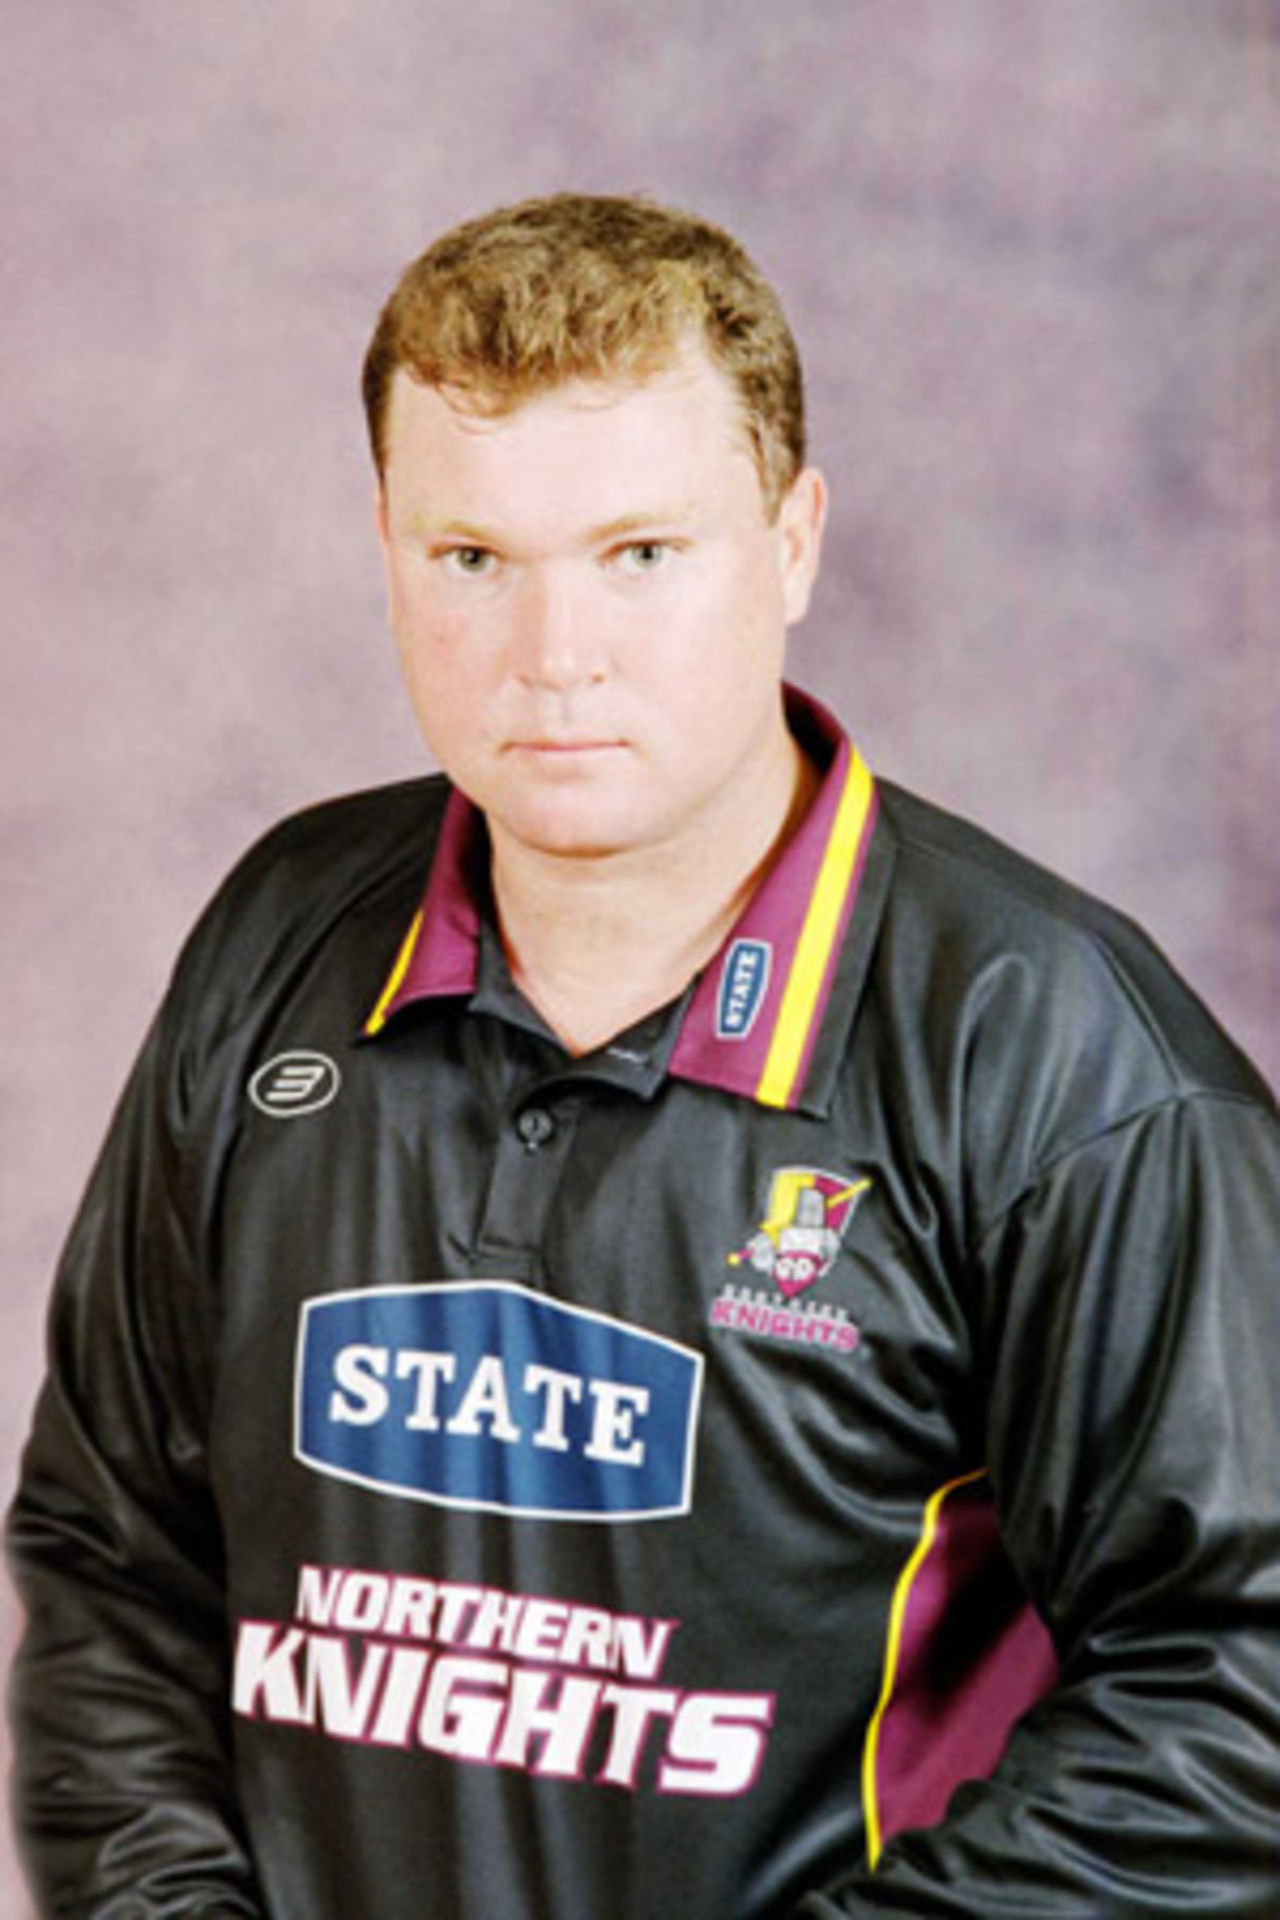 Portrait of Michael Parlane, Northern Districts player in the 2001/02 season.